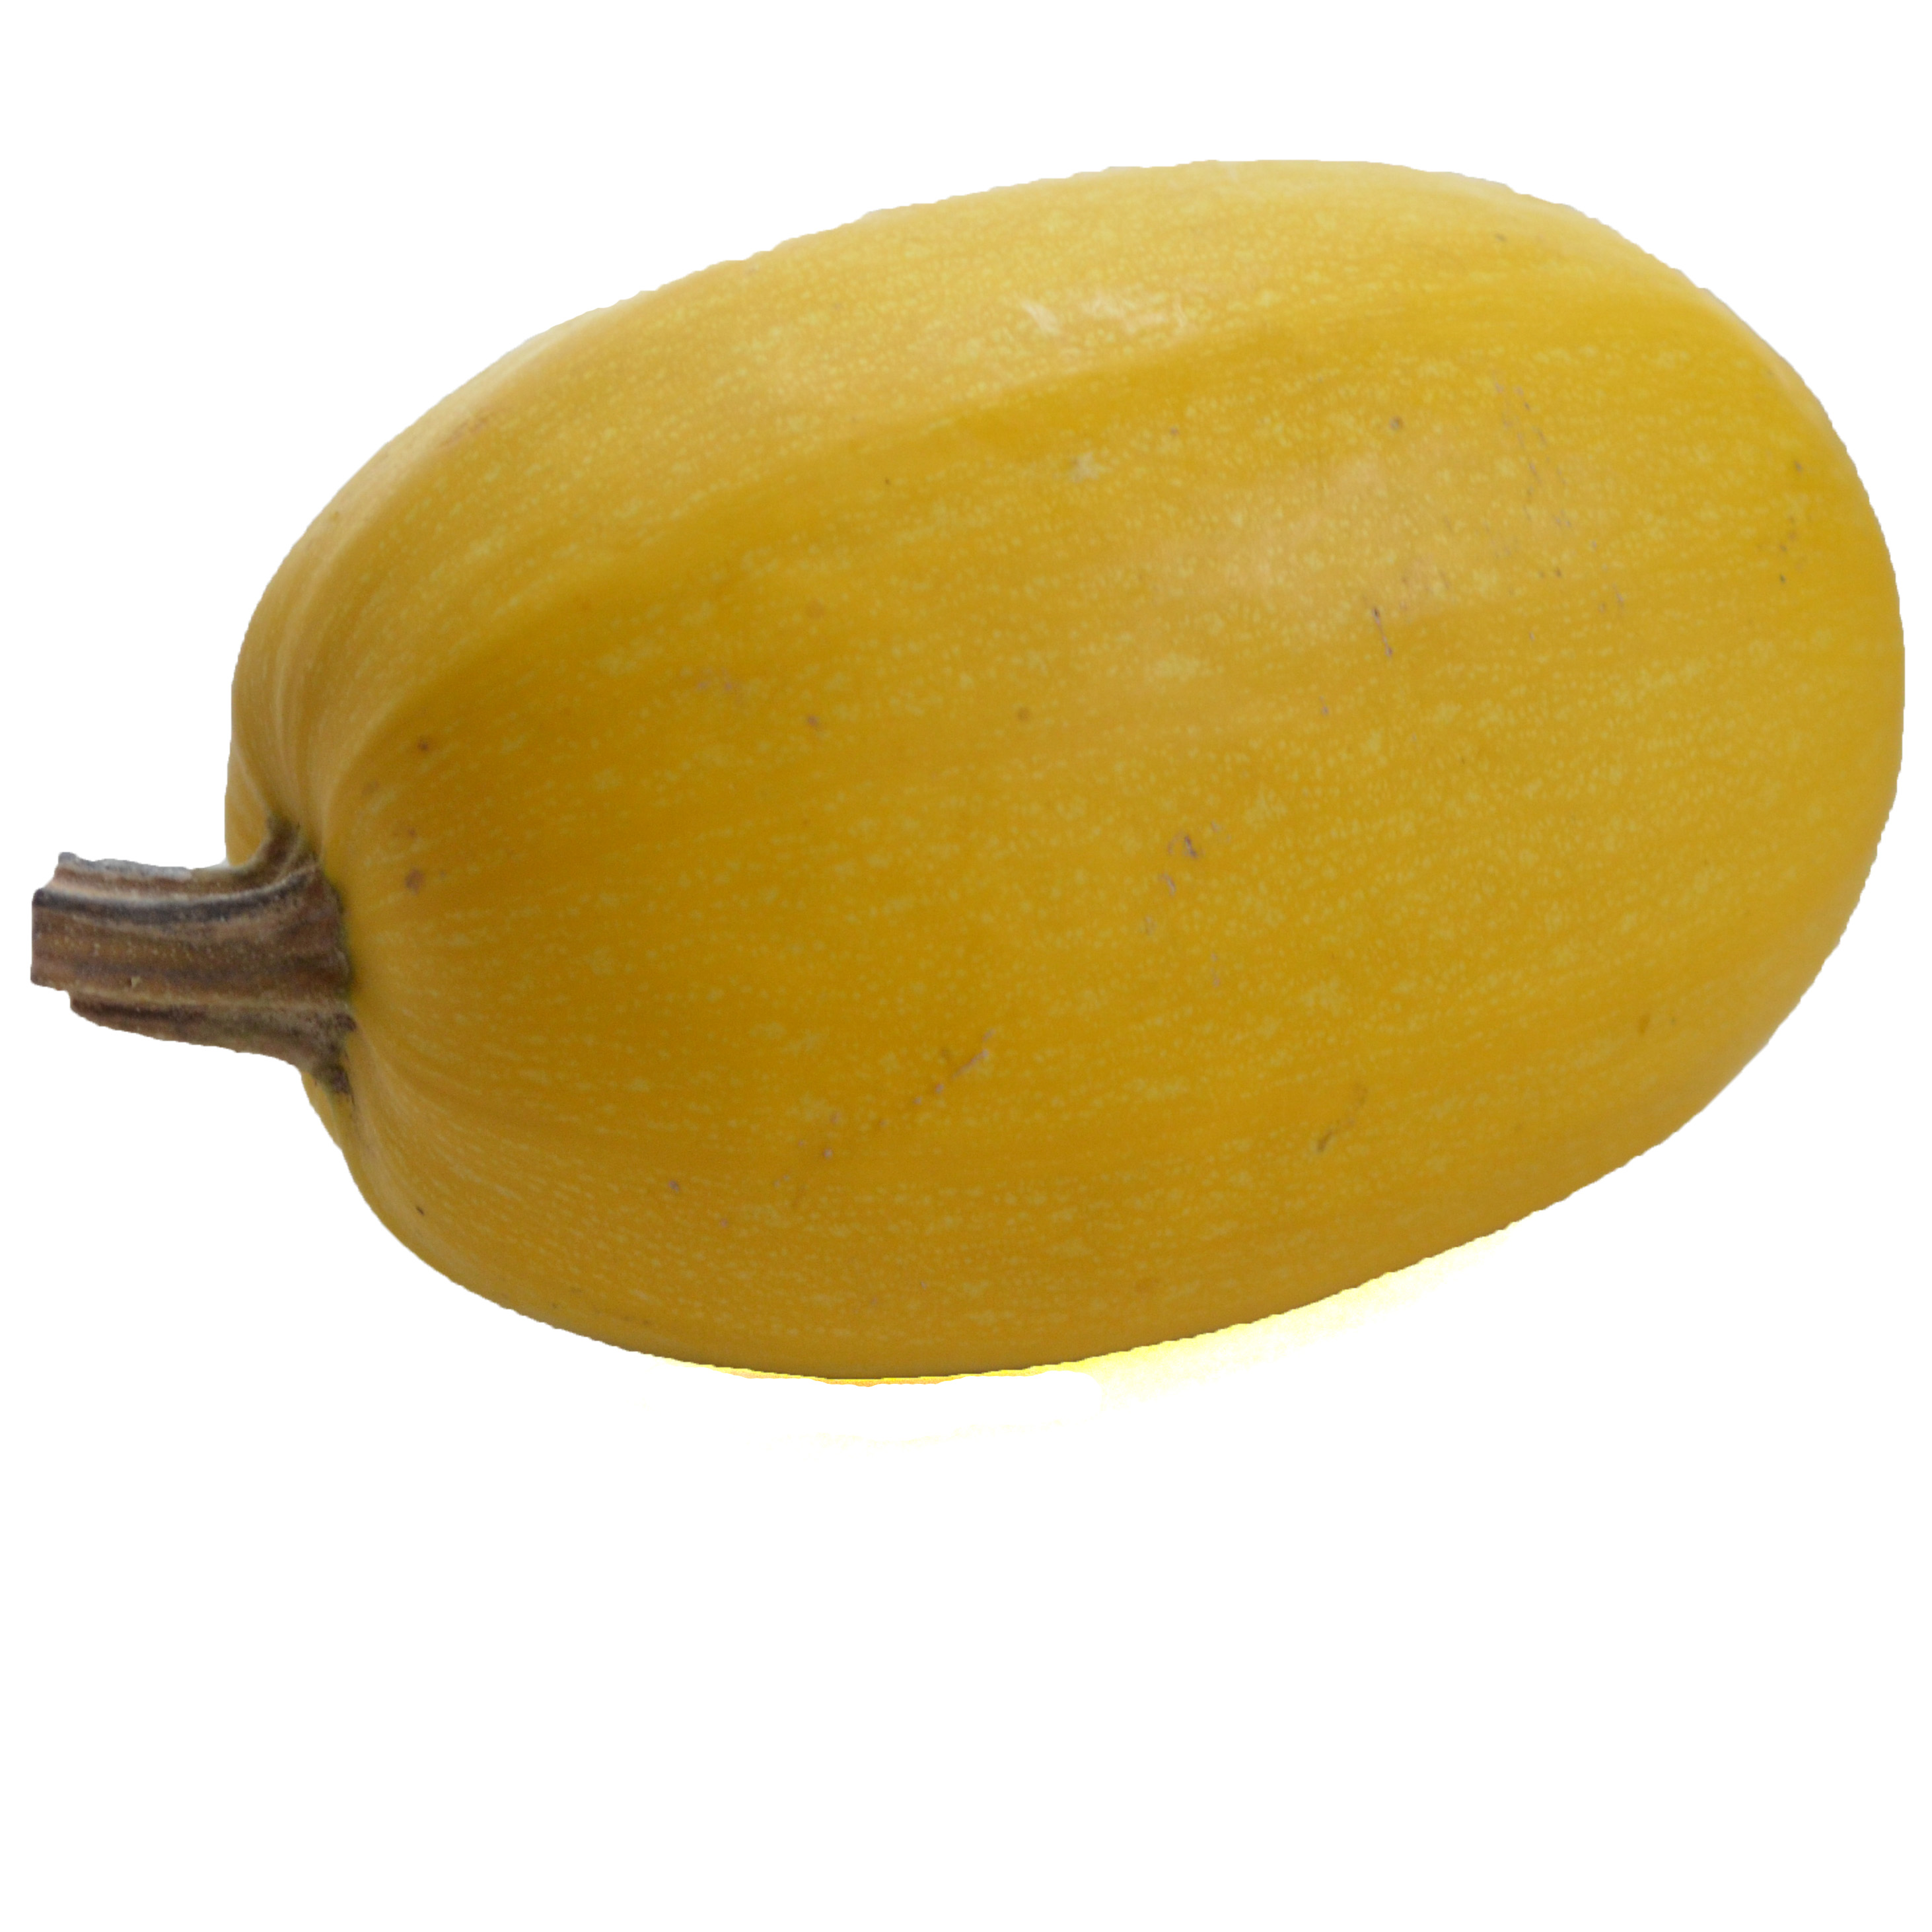 Spaghetti Squash: Sweet, stringy squash light yellow skin. Ideal in gratins or casseroles, or as a replacement for pasta.